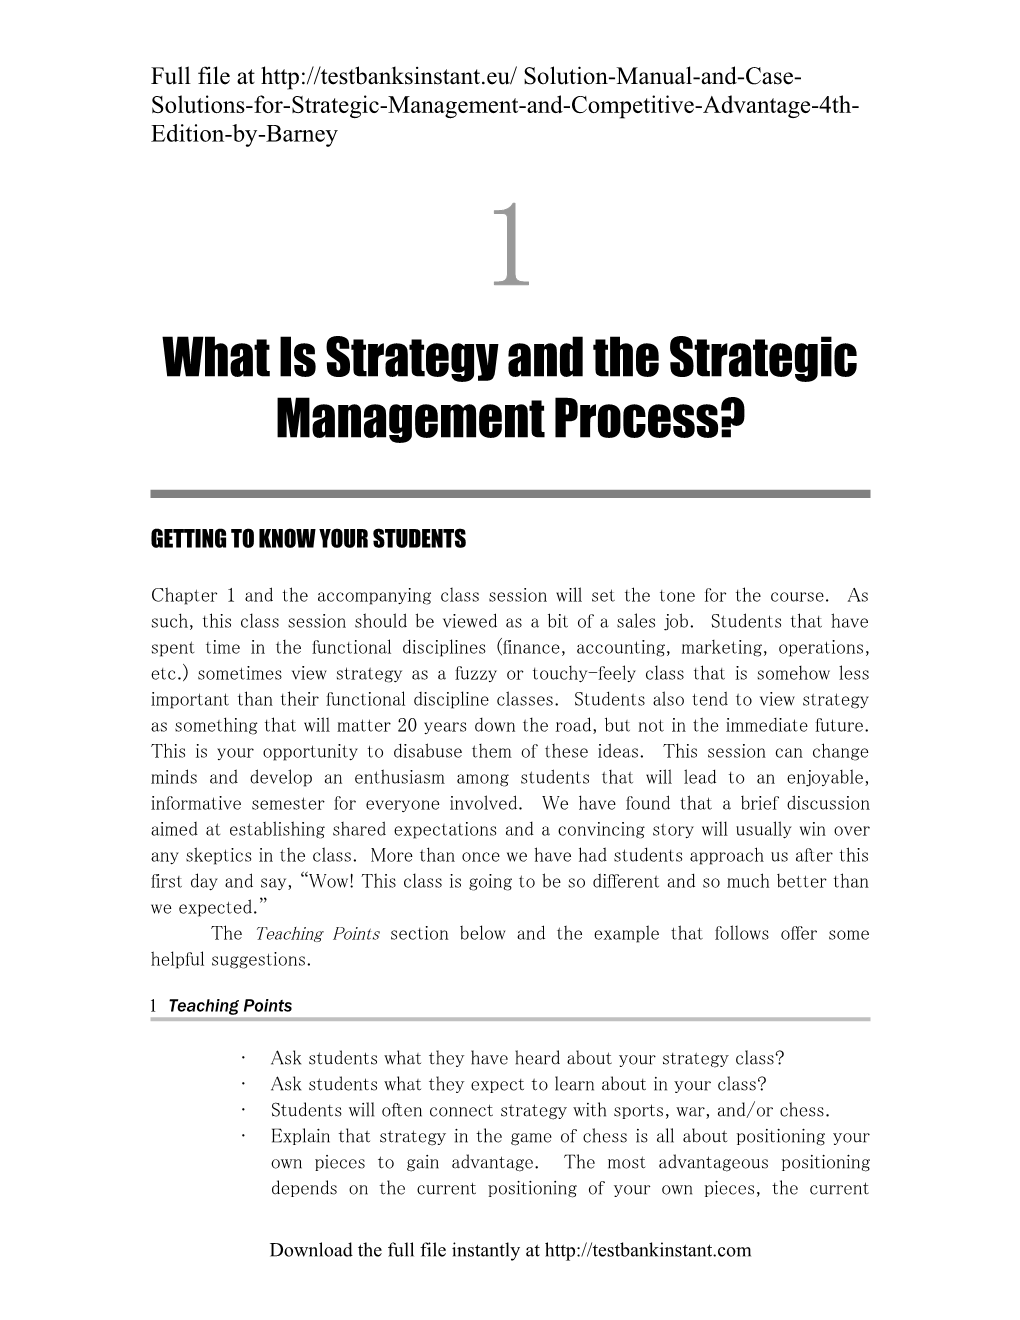 What Is Strategy and the Strategic Management Process?